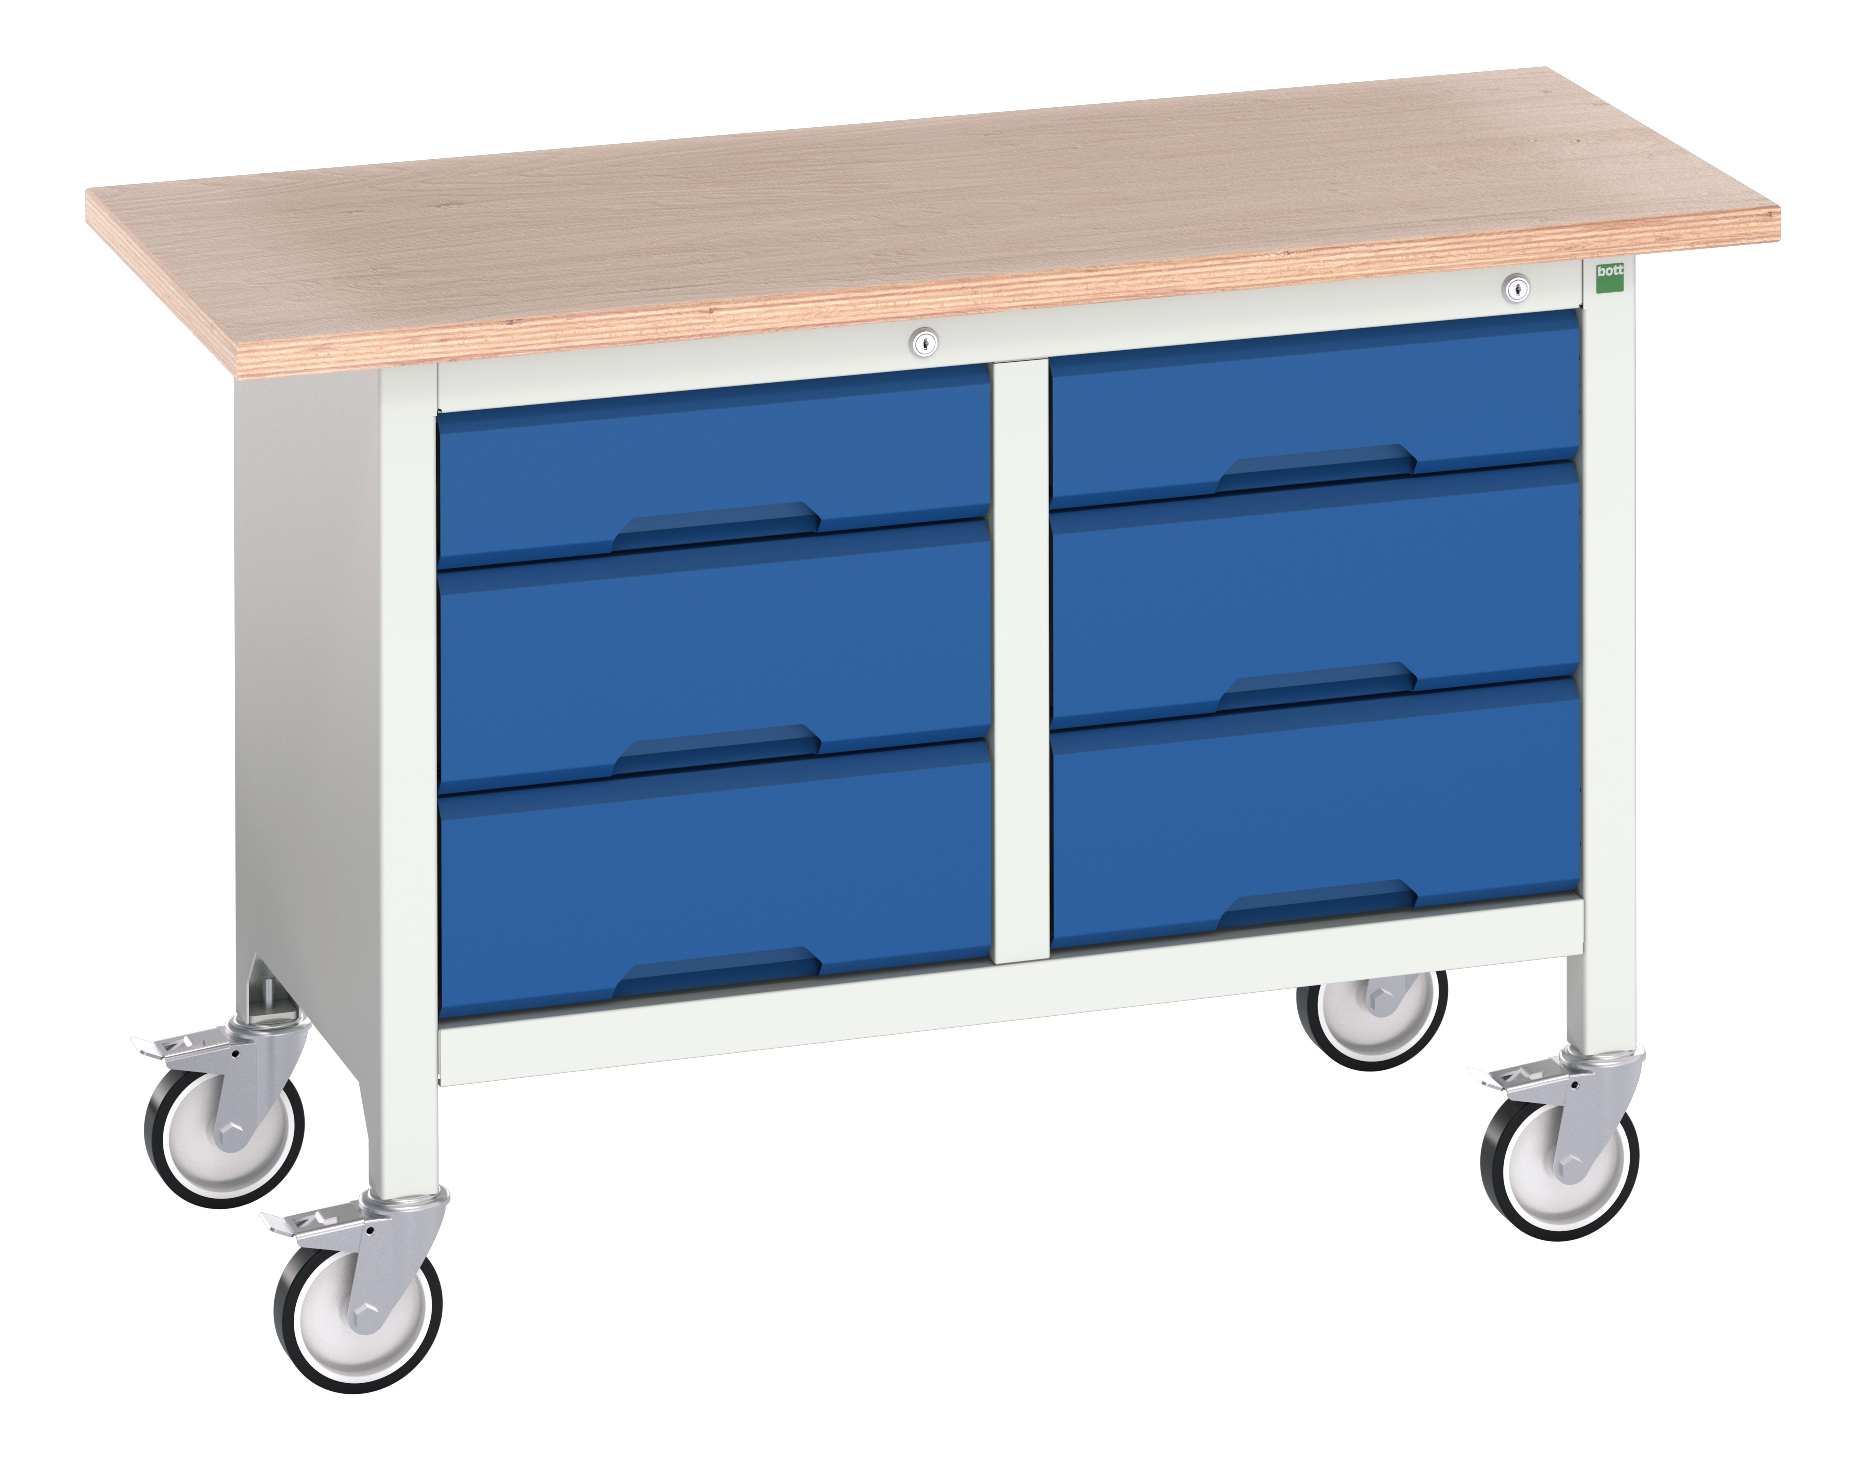 Bott Verso Mobile Storage Bench With 3 Drawer Cabinet / 3 Drawer Cabinet - 16923204.11